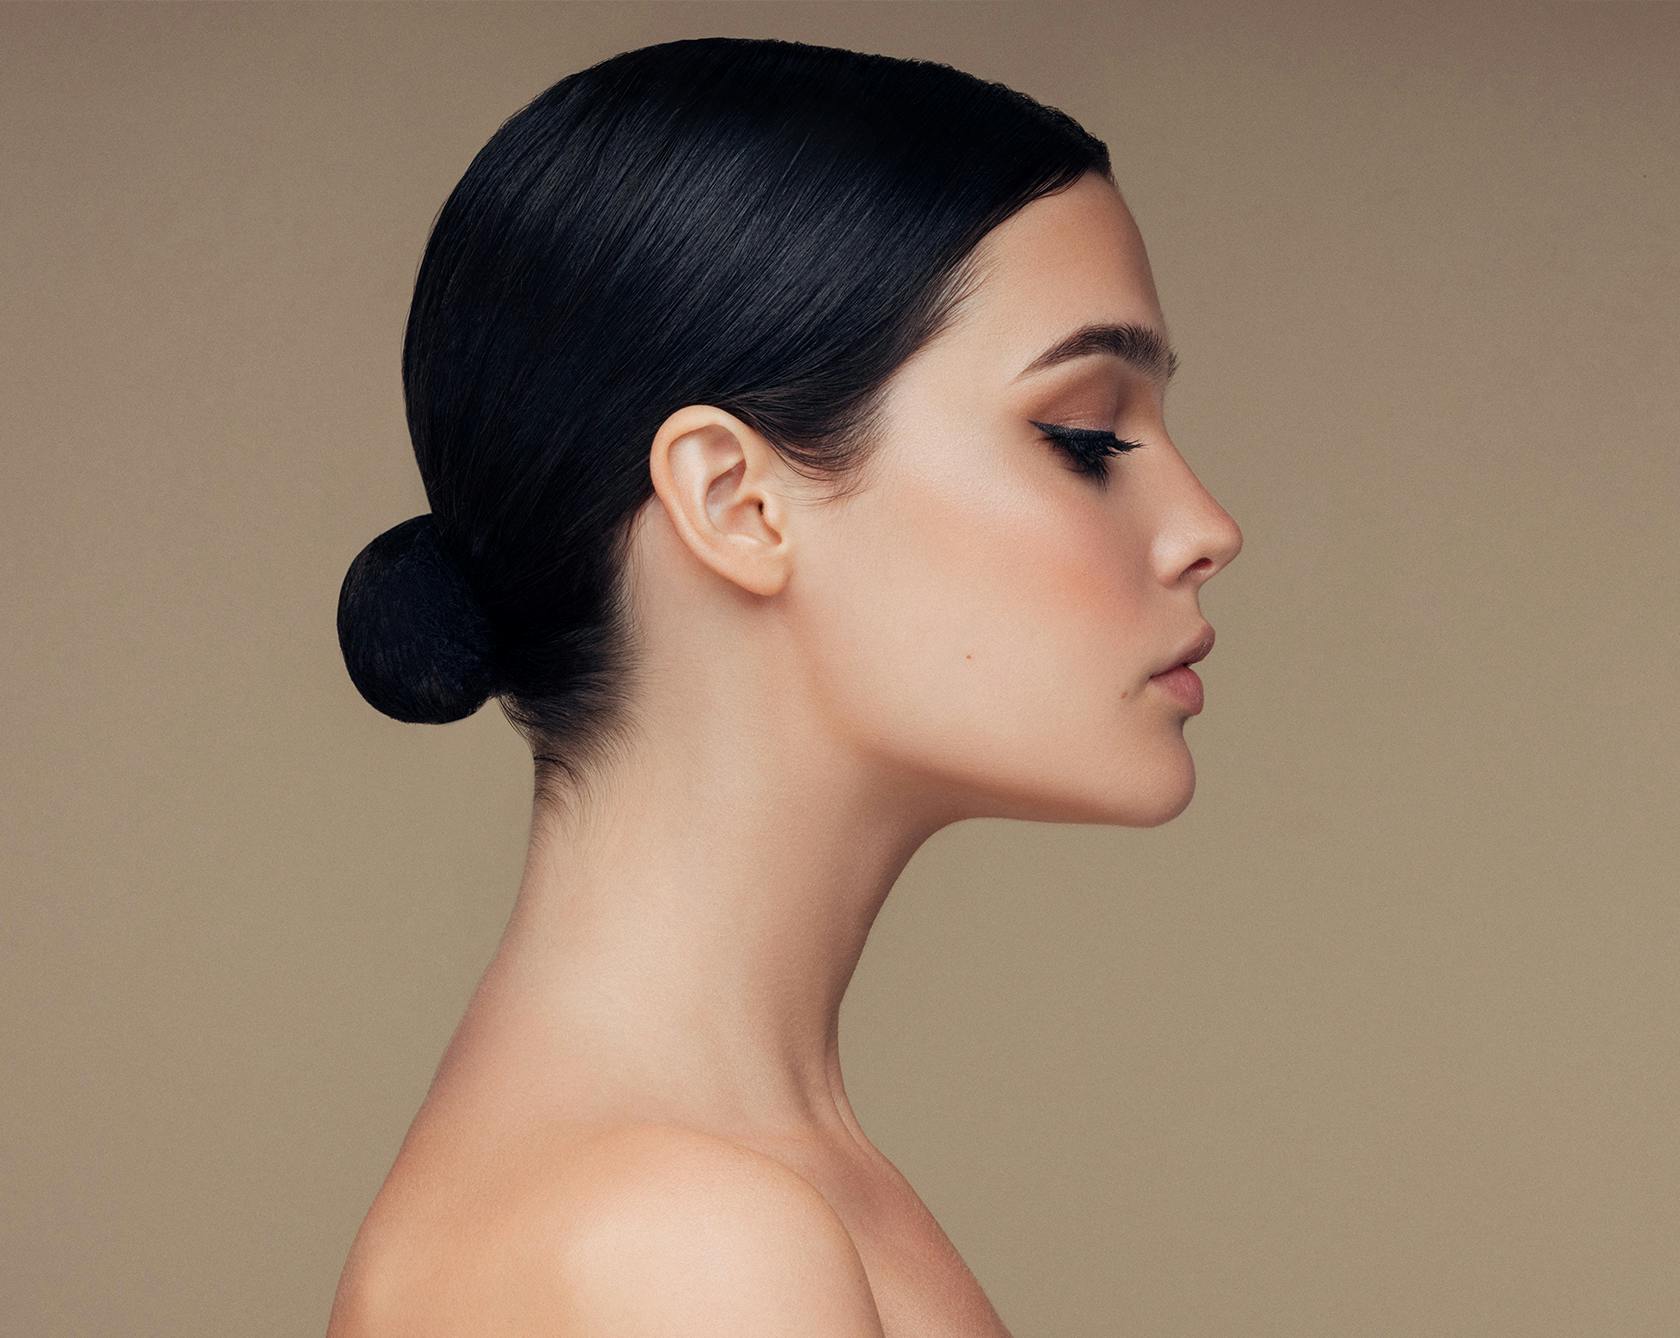 a side view of a woman with hair hair up in a bun